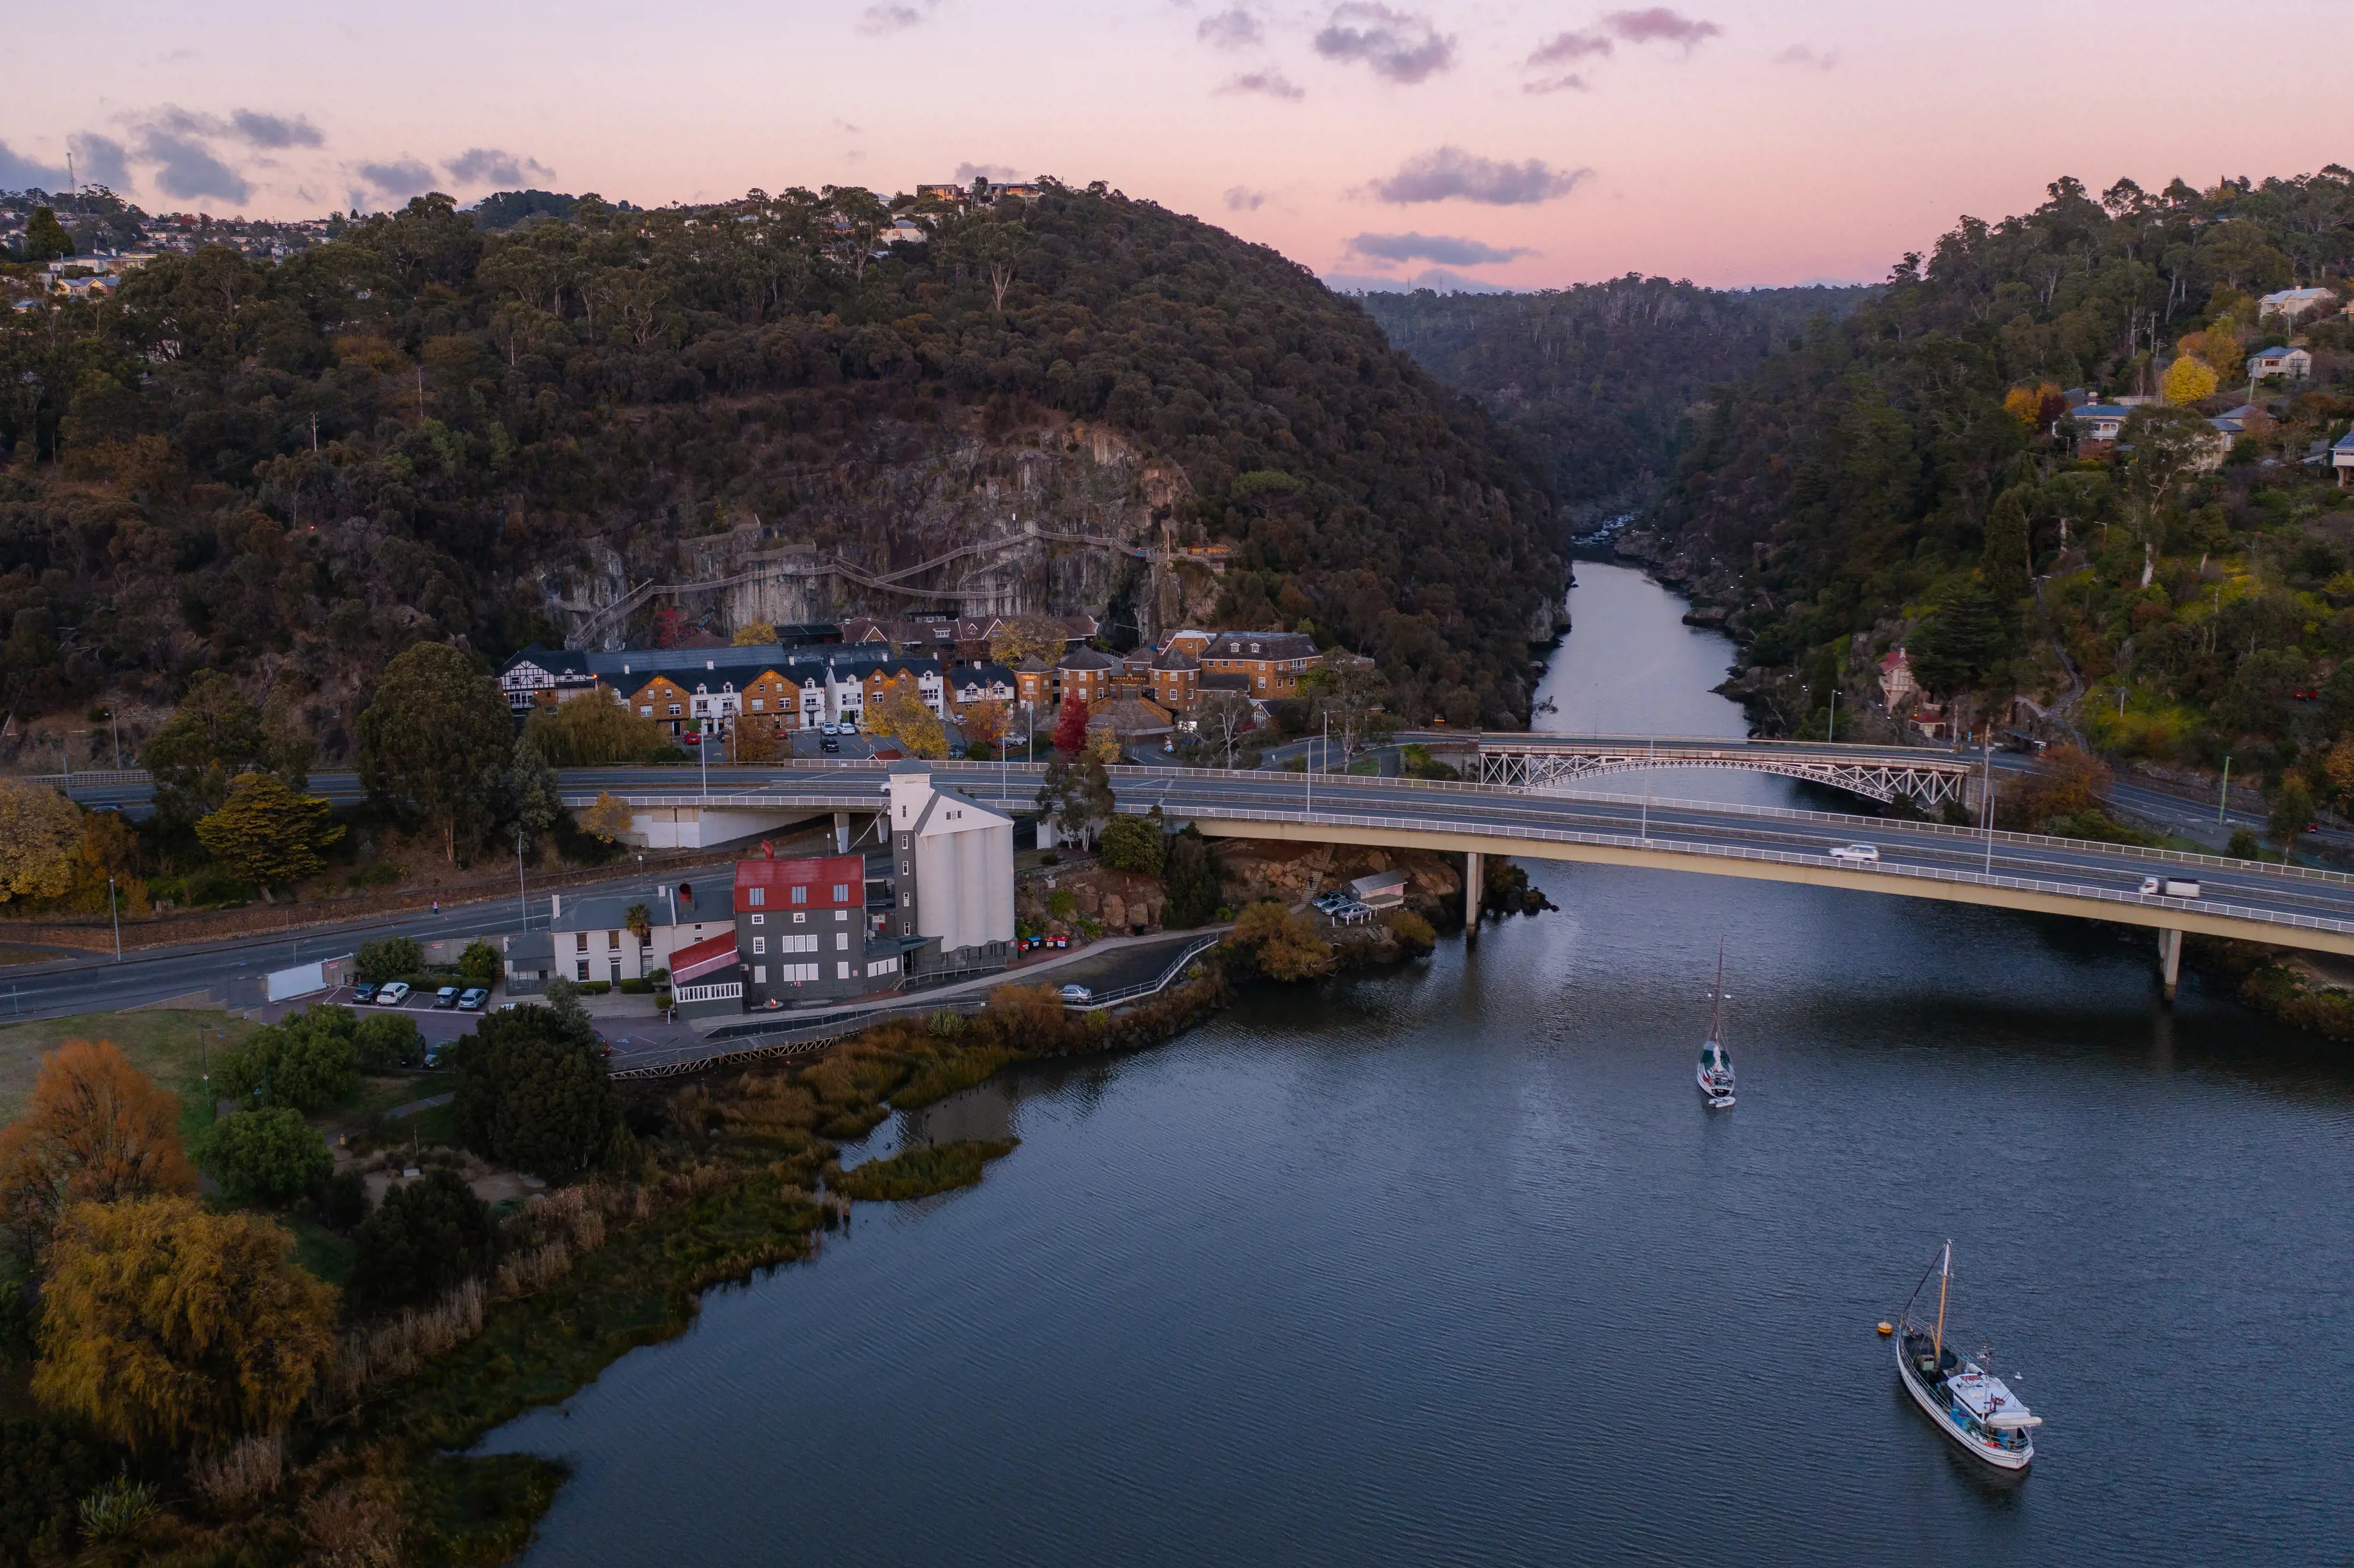 Aerial shot of Kings Bridge, Cataract Gorge Reserve, with pink skies in the backdrop and boats in the river.